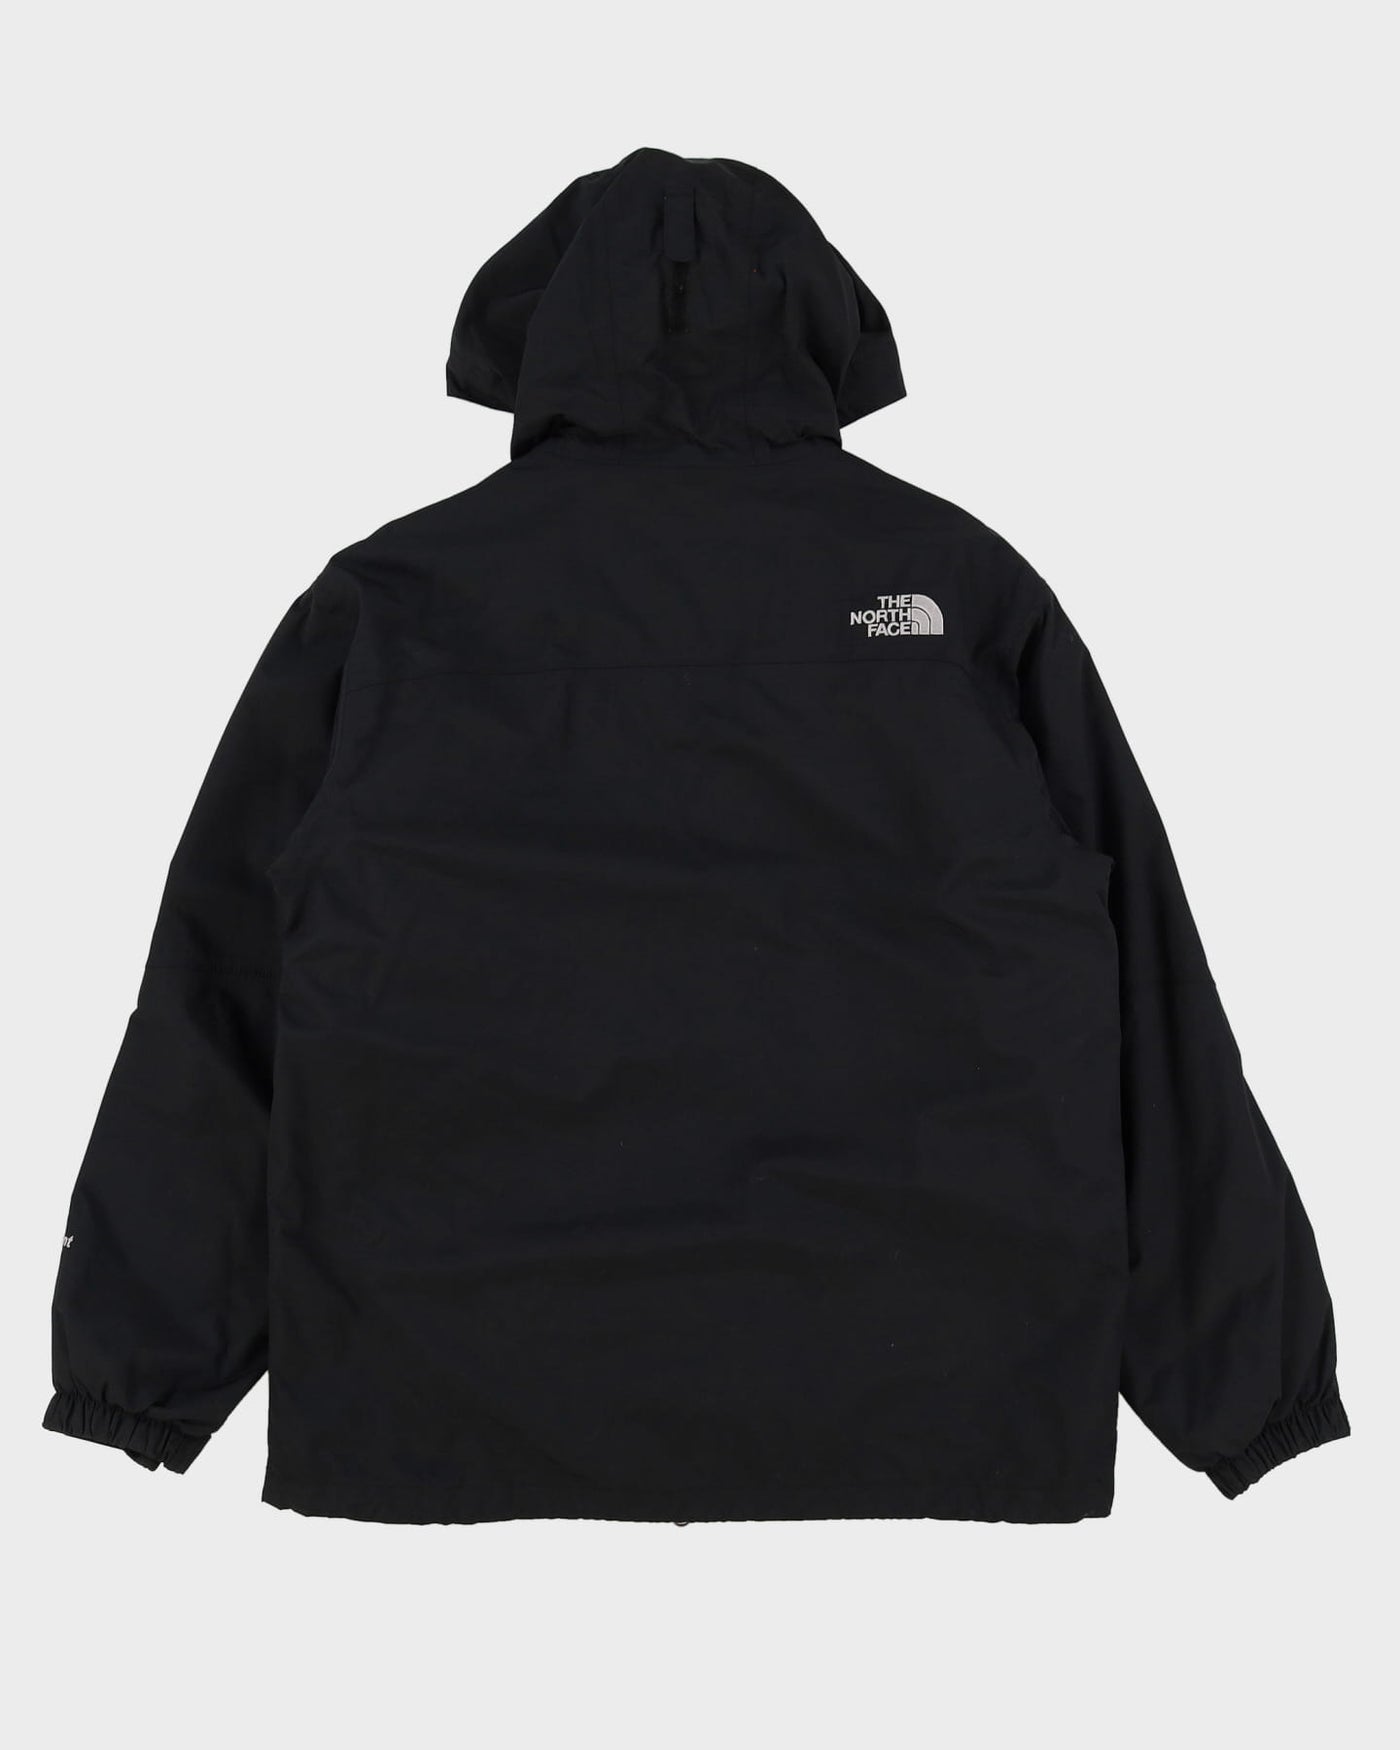 The North Face Black HyVent Hooded Zip Up Windbreaker Jacket - L / XL